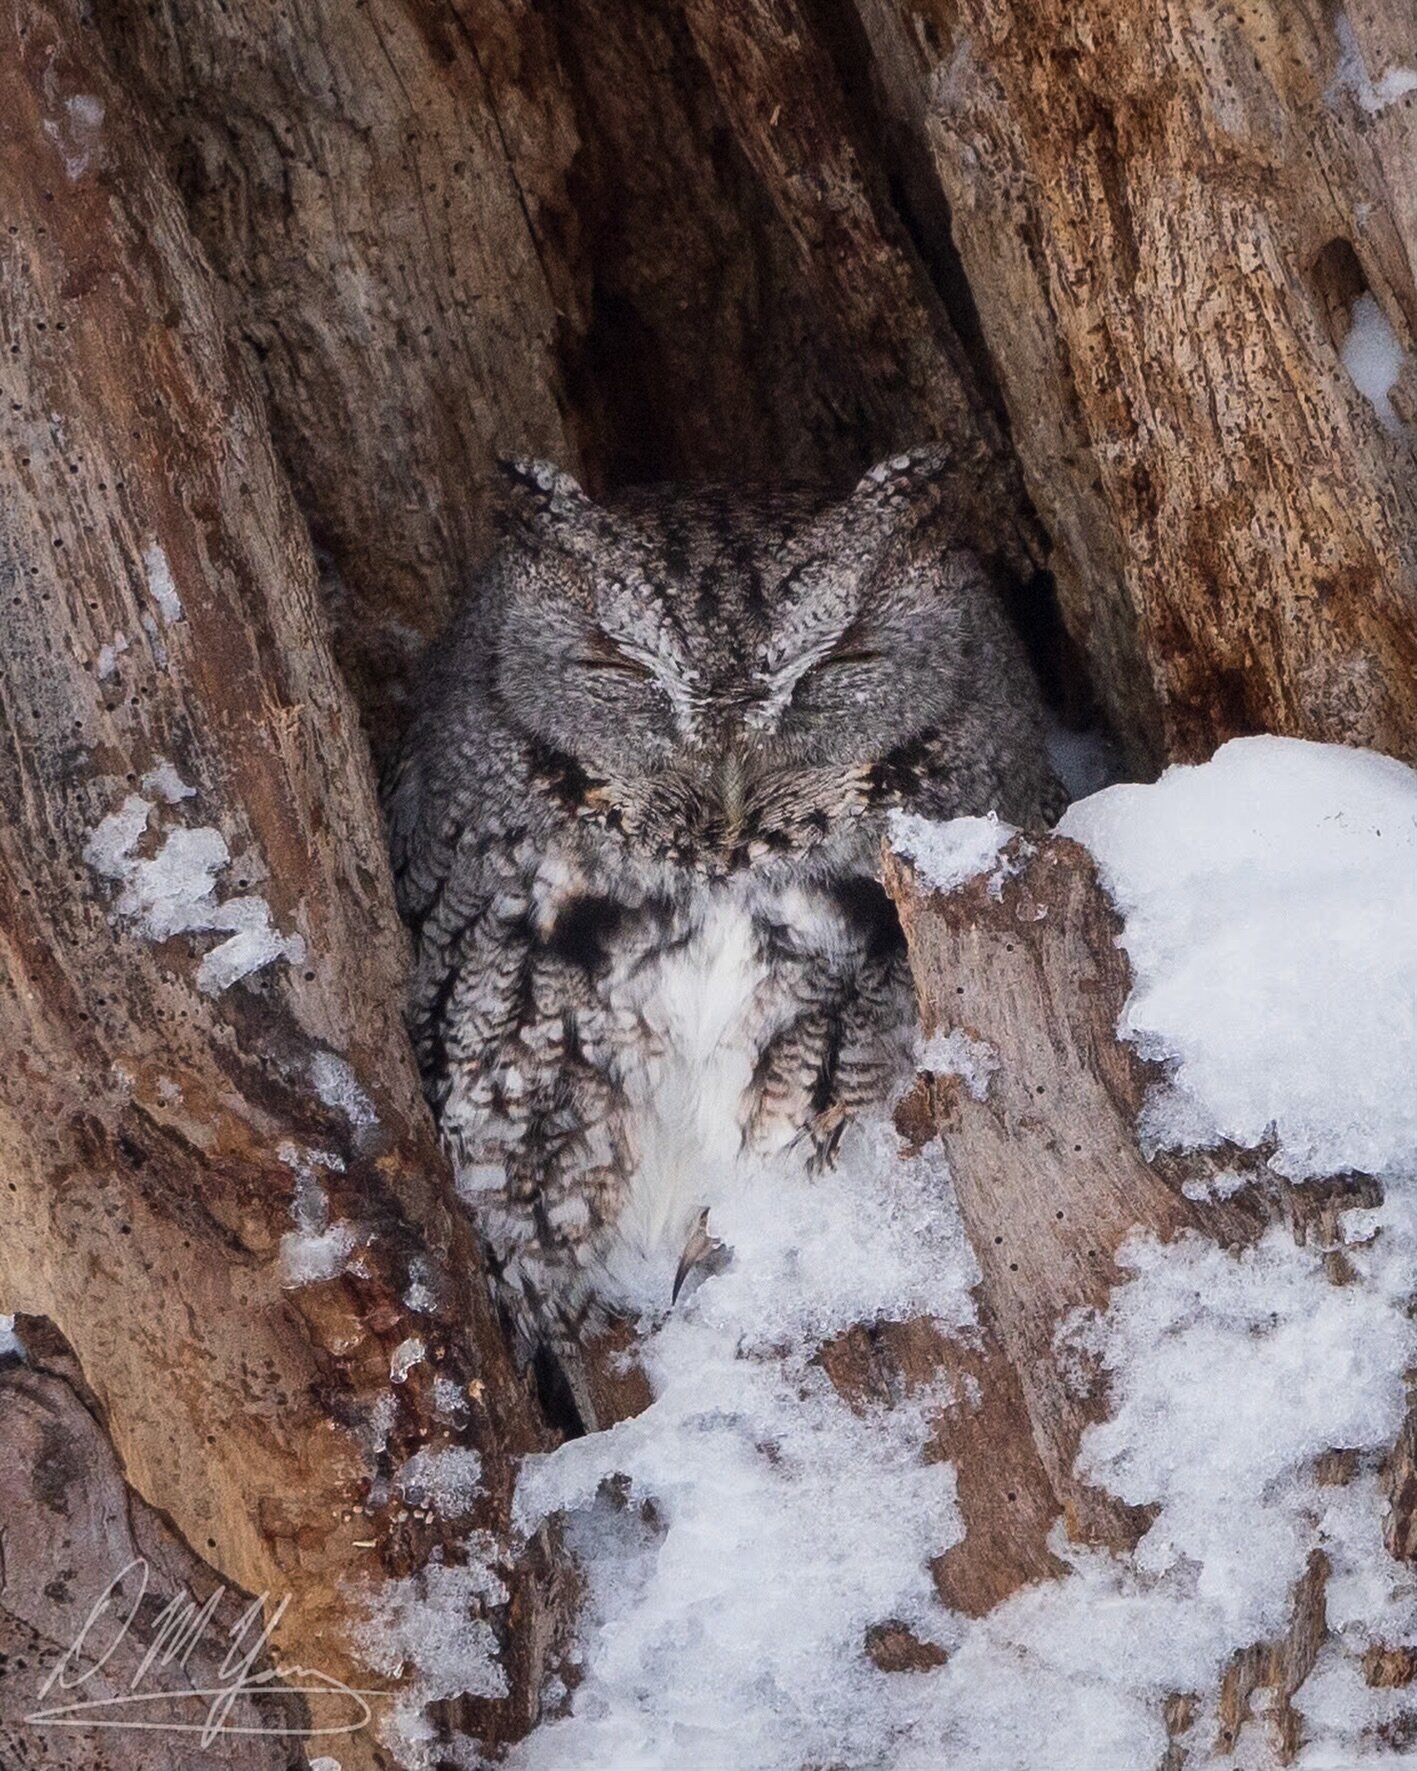 Wonderful to find this Screech Owl sleeping cozily this morning after yesterday&rsquo;s snowstorm!
_____
#screechowl #owl #owllovers #owlsofinstagram #birds #wildbirds #bestbirdshots #birdlovers #birding #birdphotography #birdingphotography #birder #